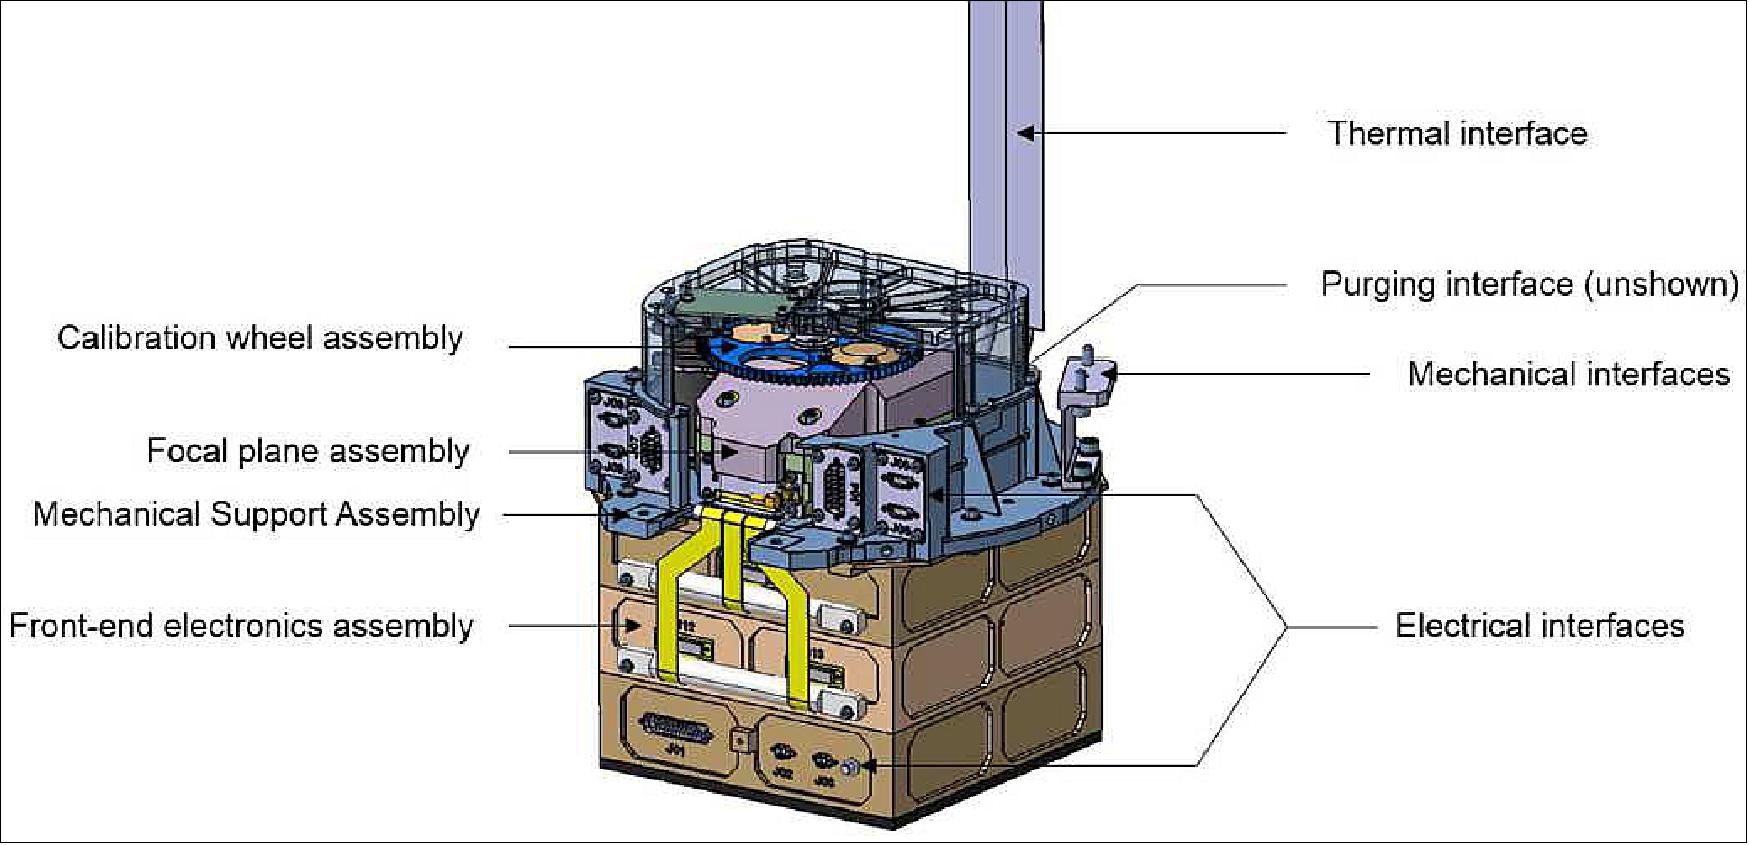 Figure 22: Illustration of the camera layout (image credit: CNES, CEA)